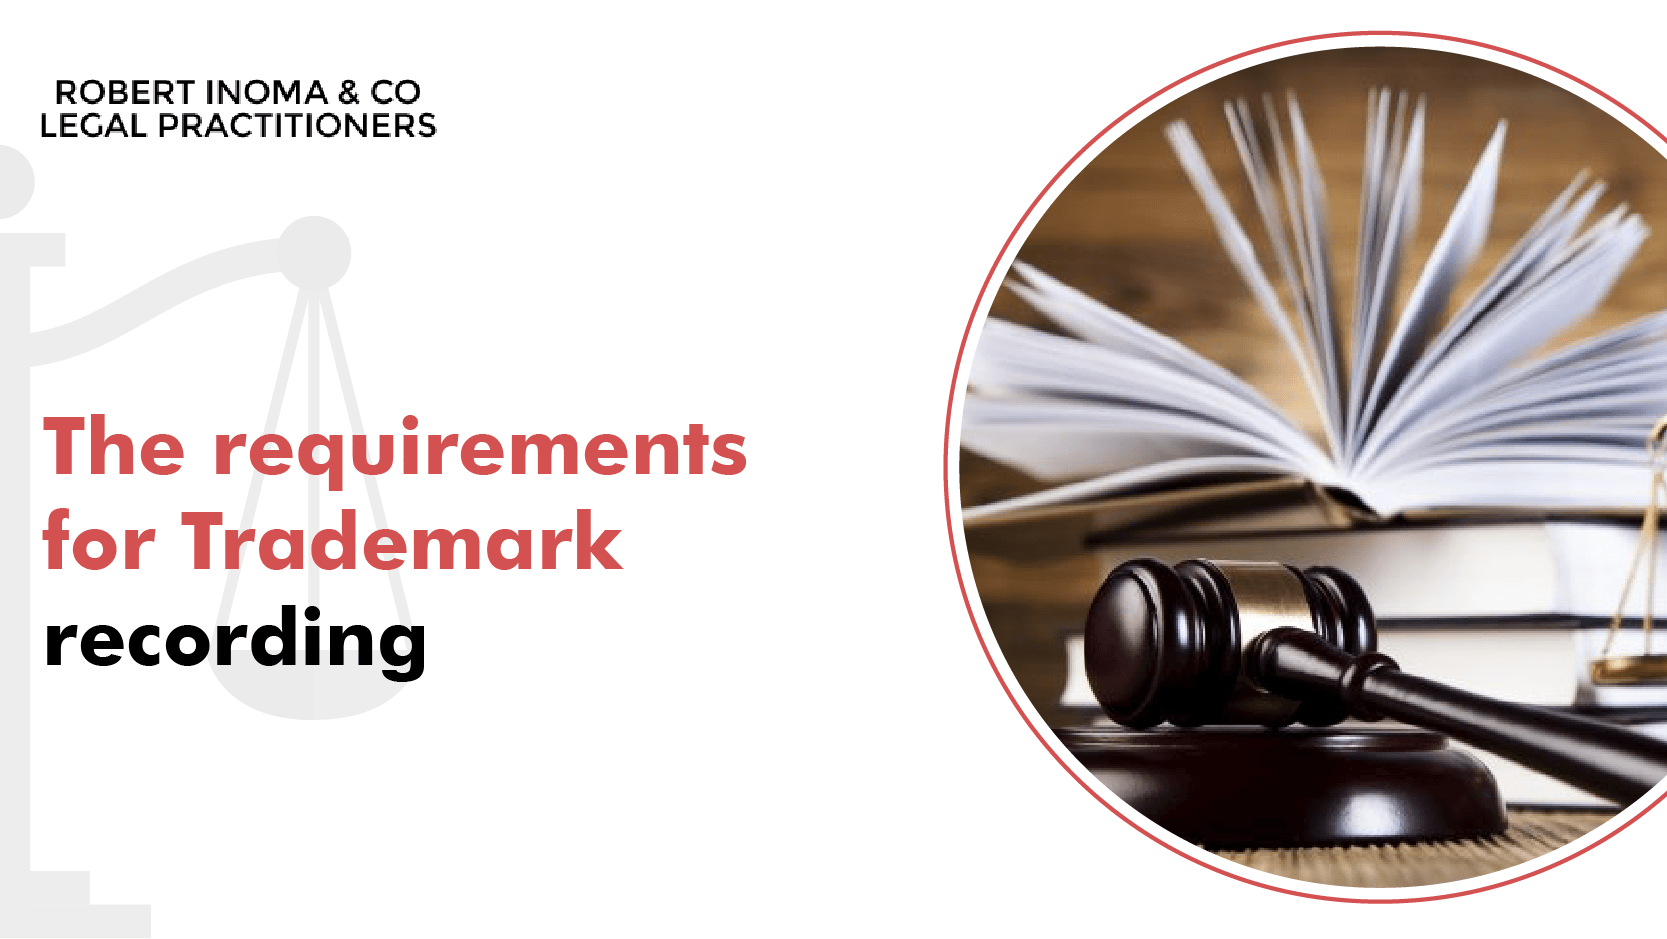 The requirements for trademark recording